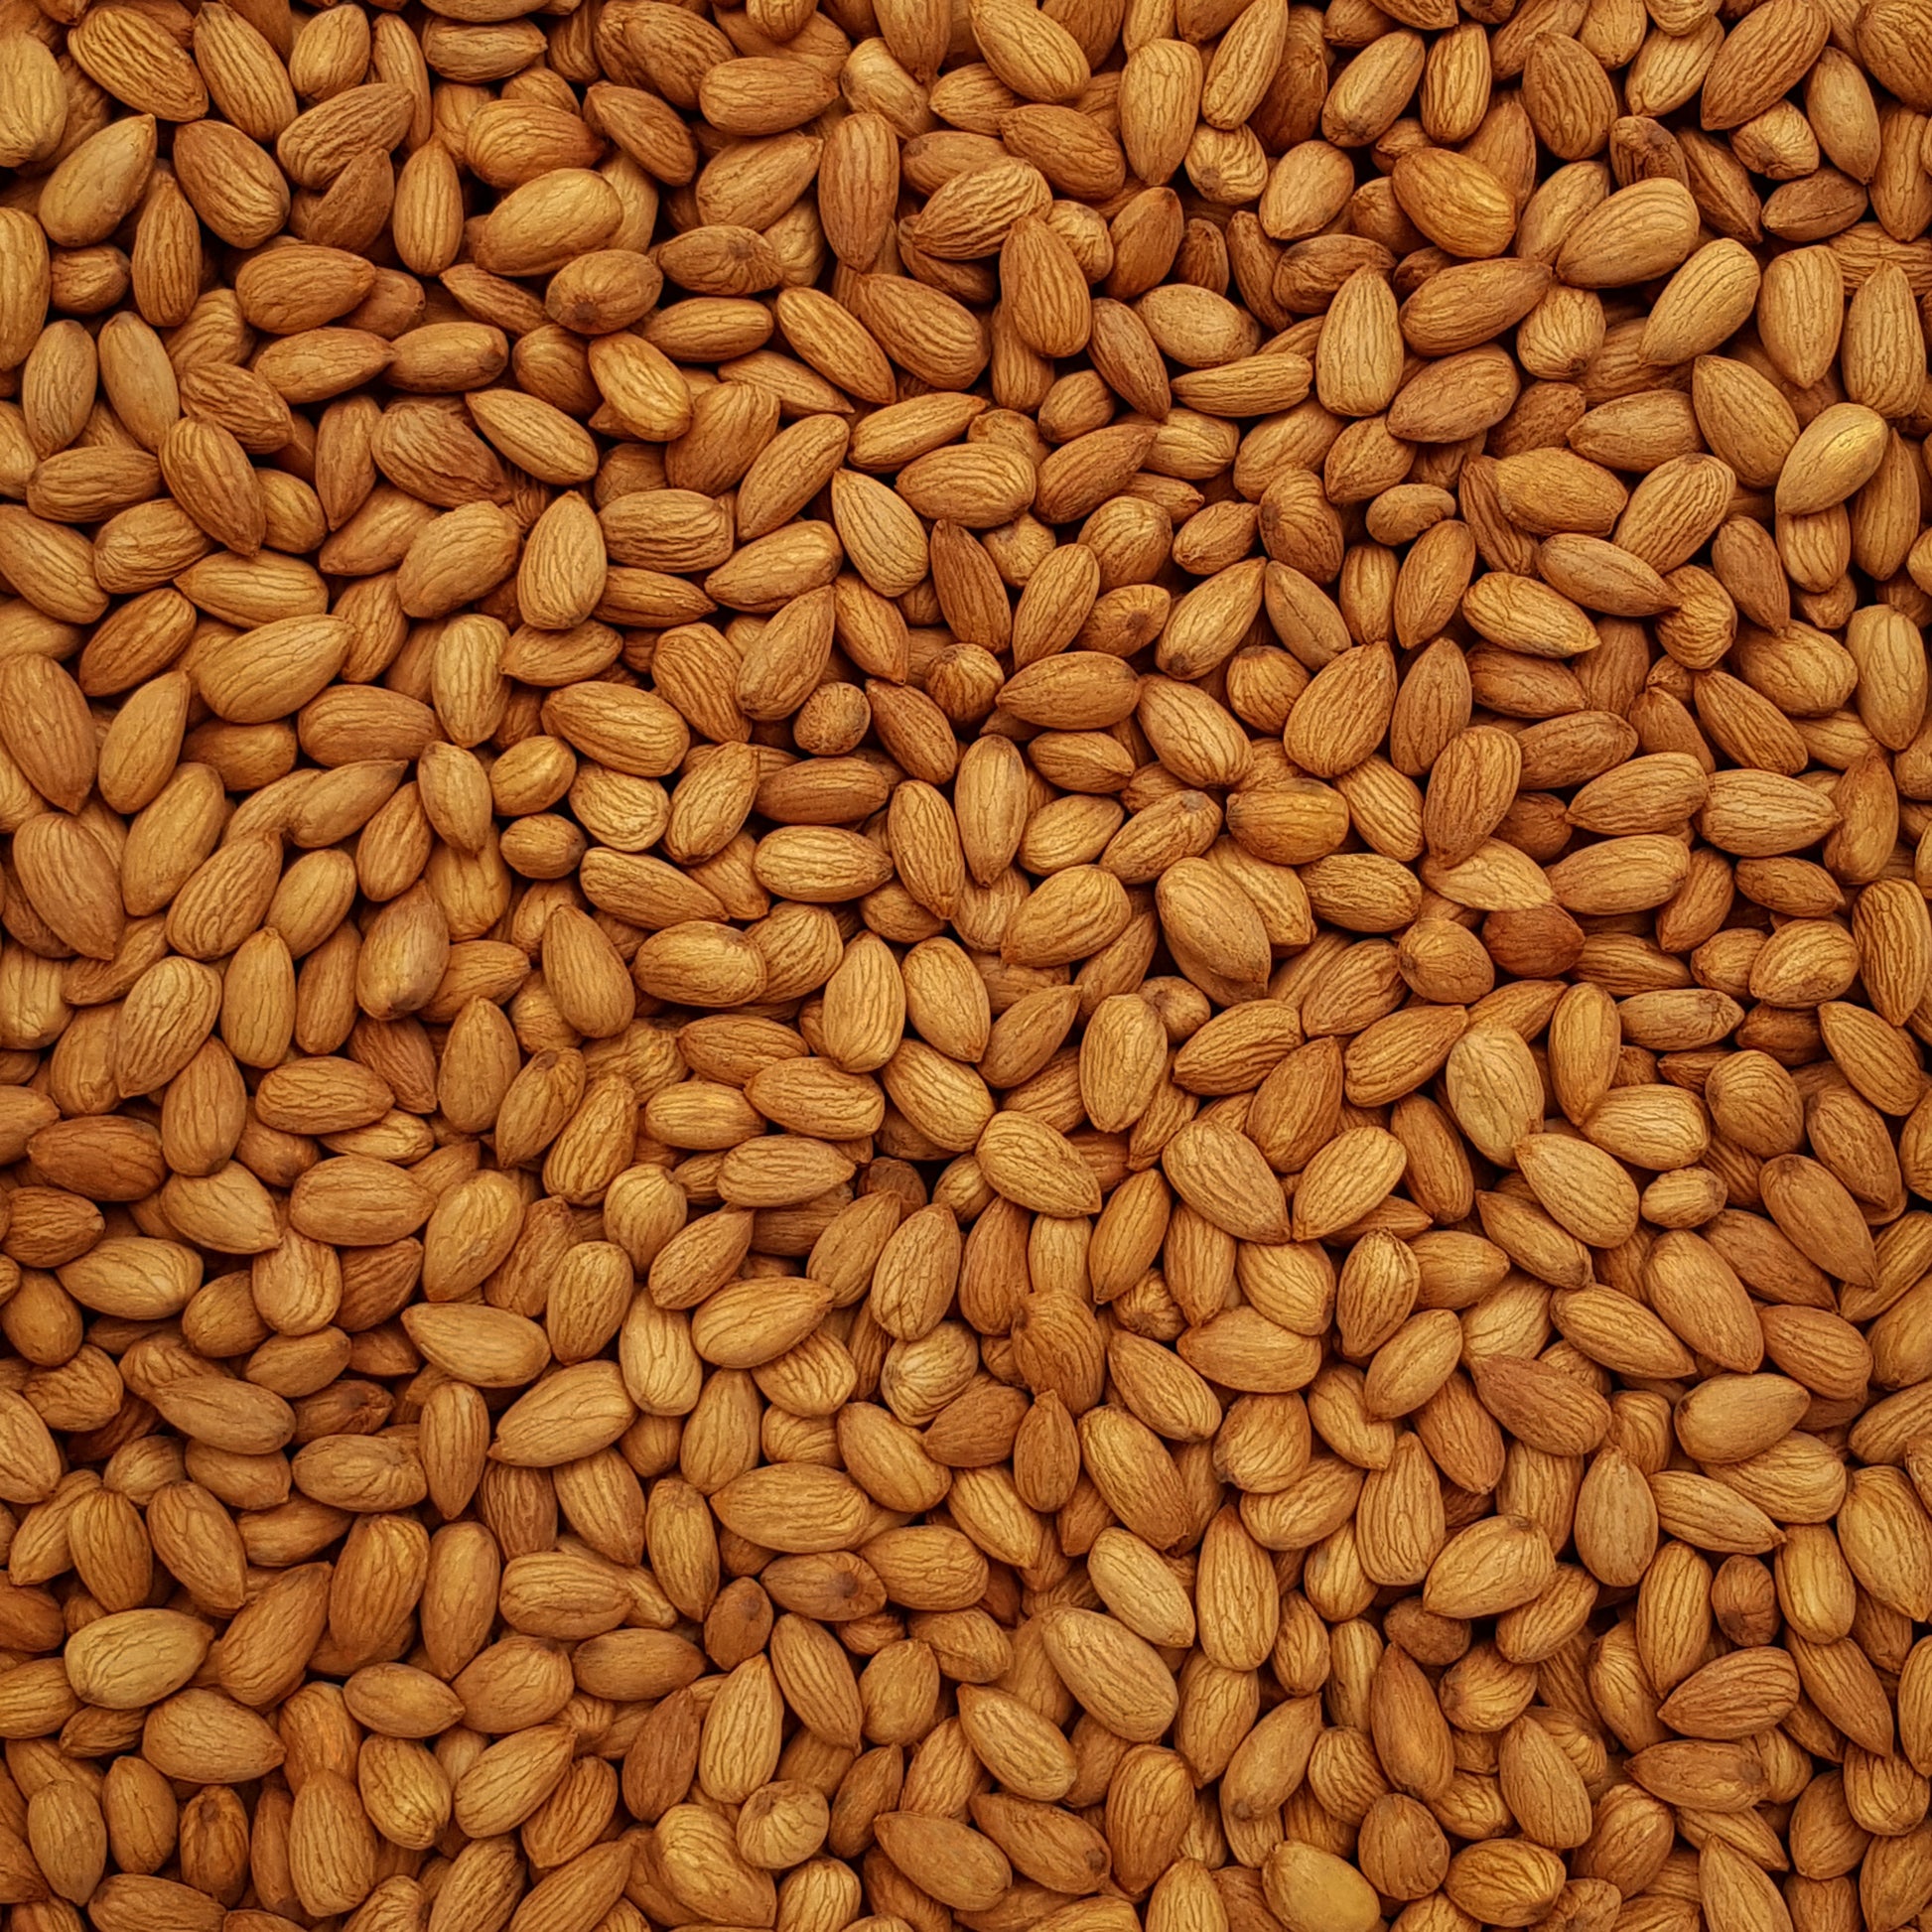 Full frame overhead image of BY NATURE Activated Almonds - Nonpareil Supreme variety, raw, unpasteurised, dried not roasted.